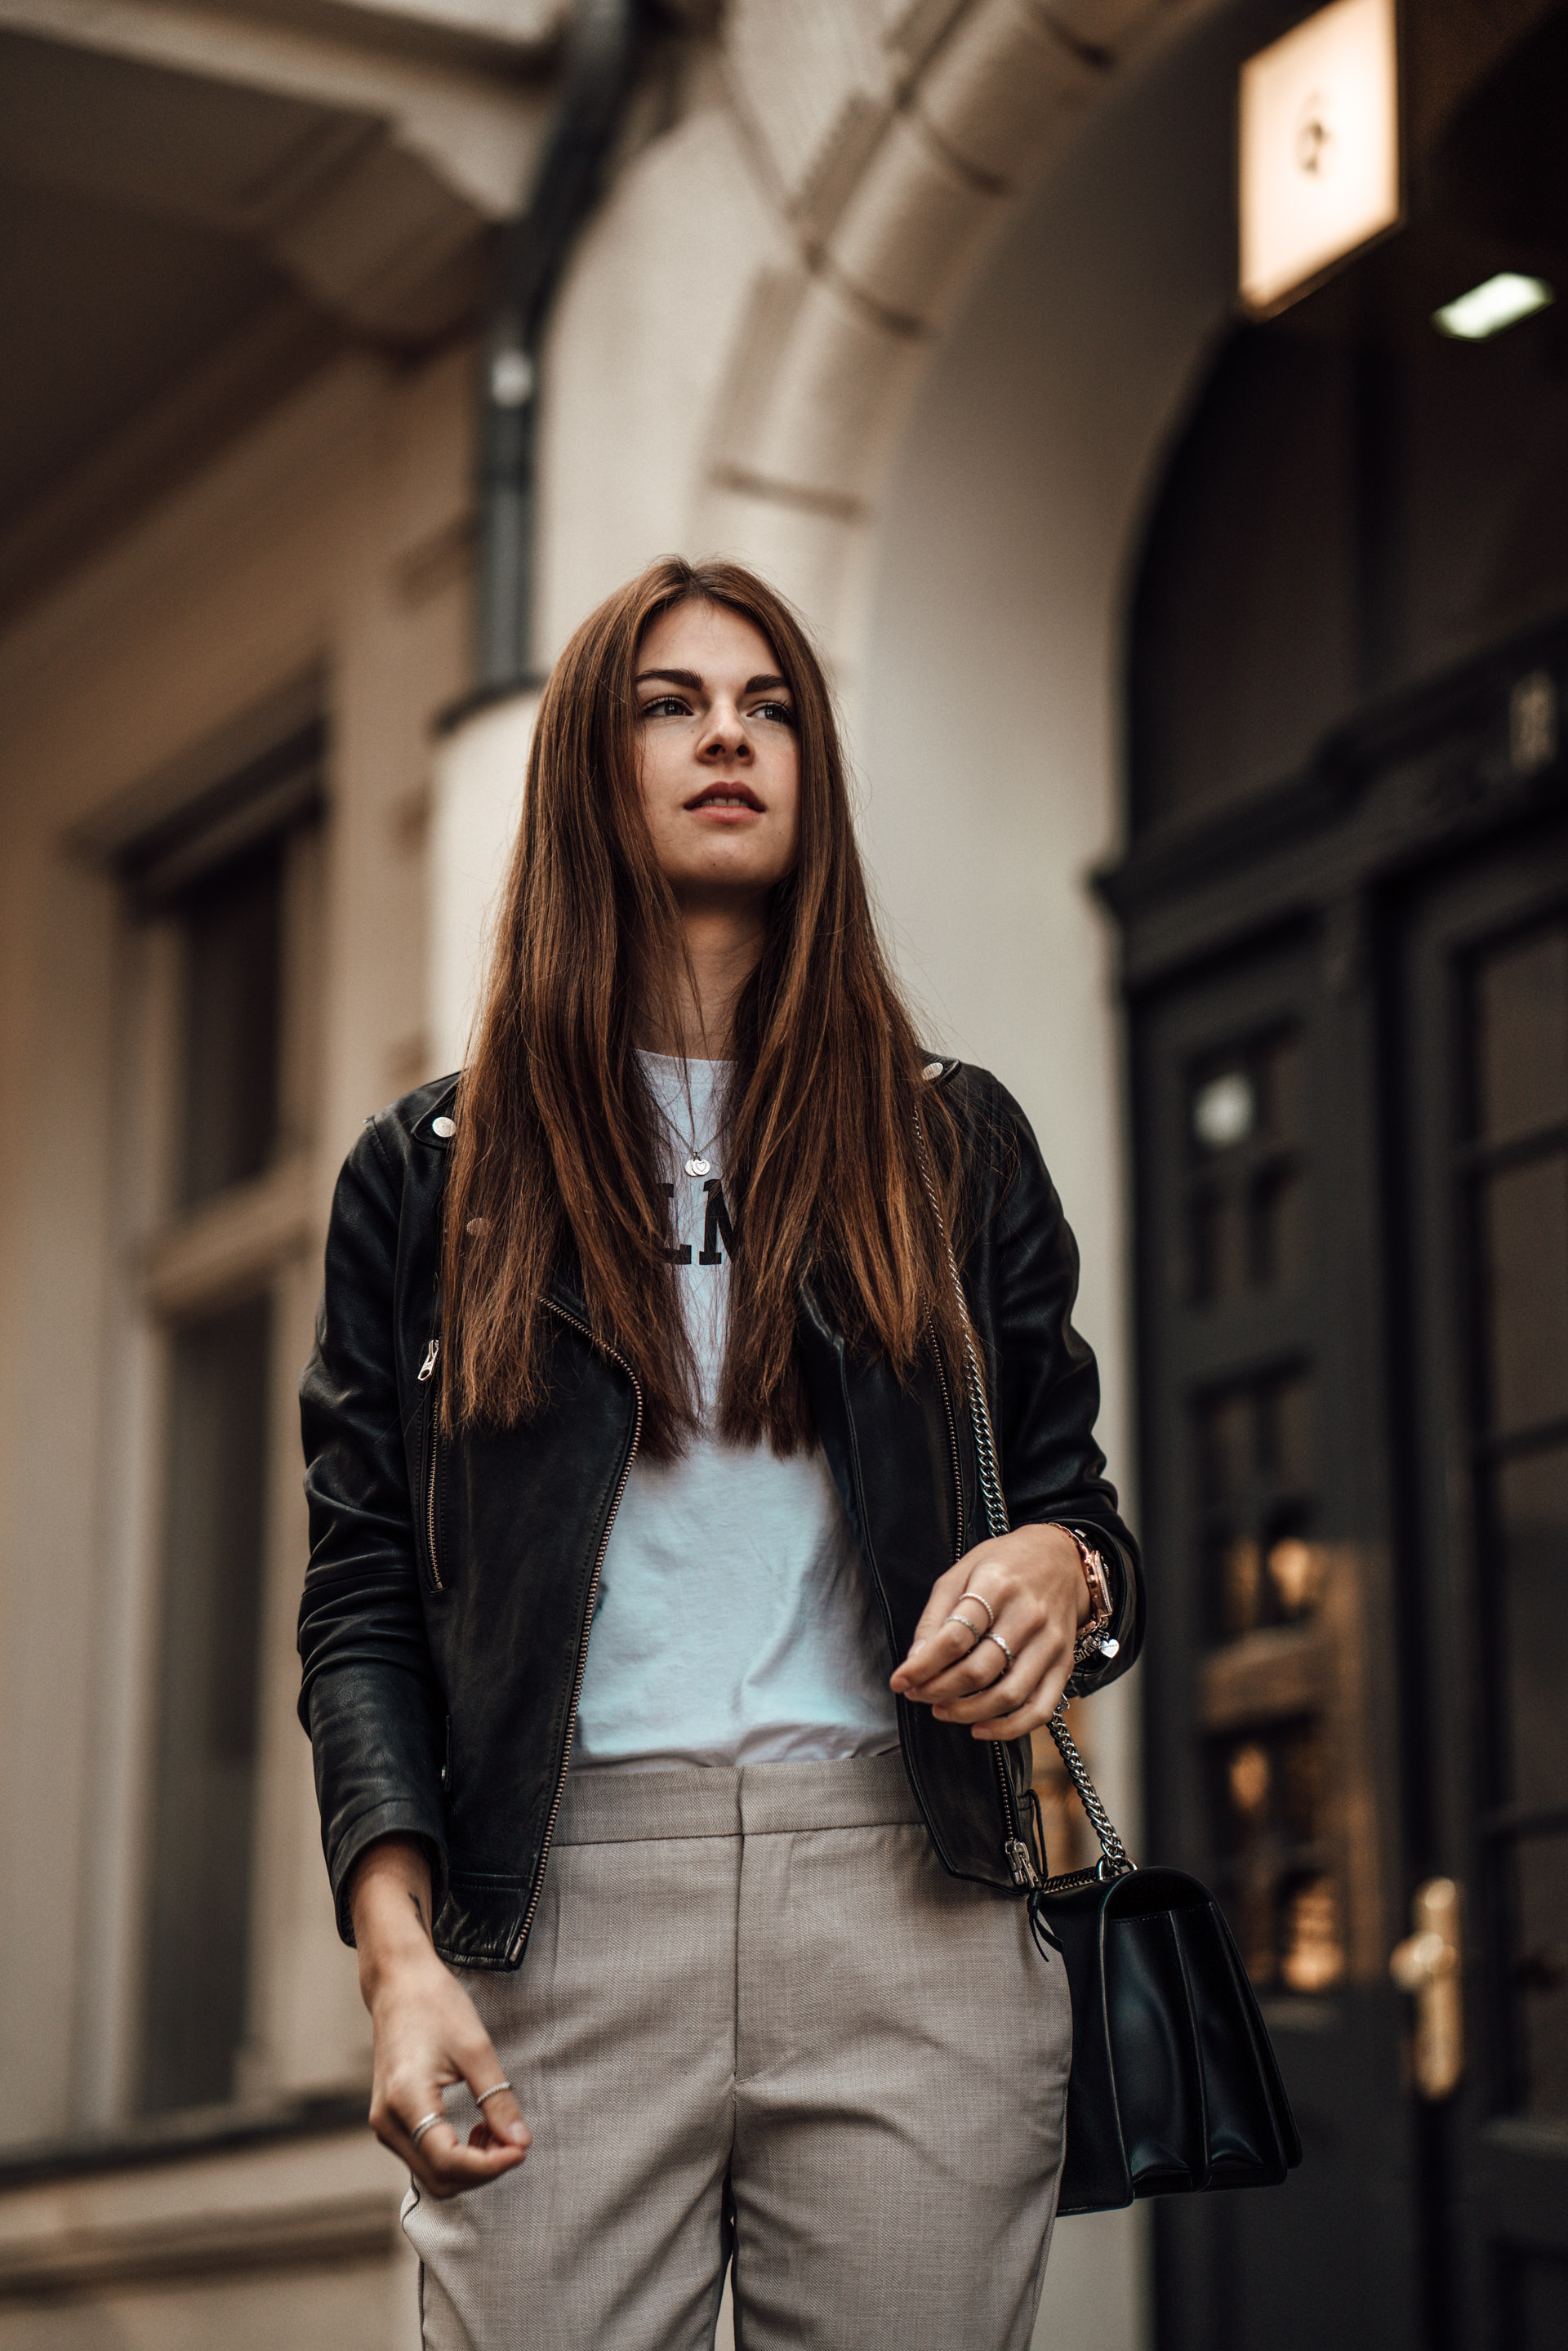 How to style a leather jacket in a casual chic way for autumn